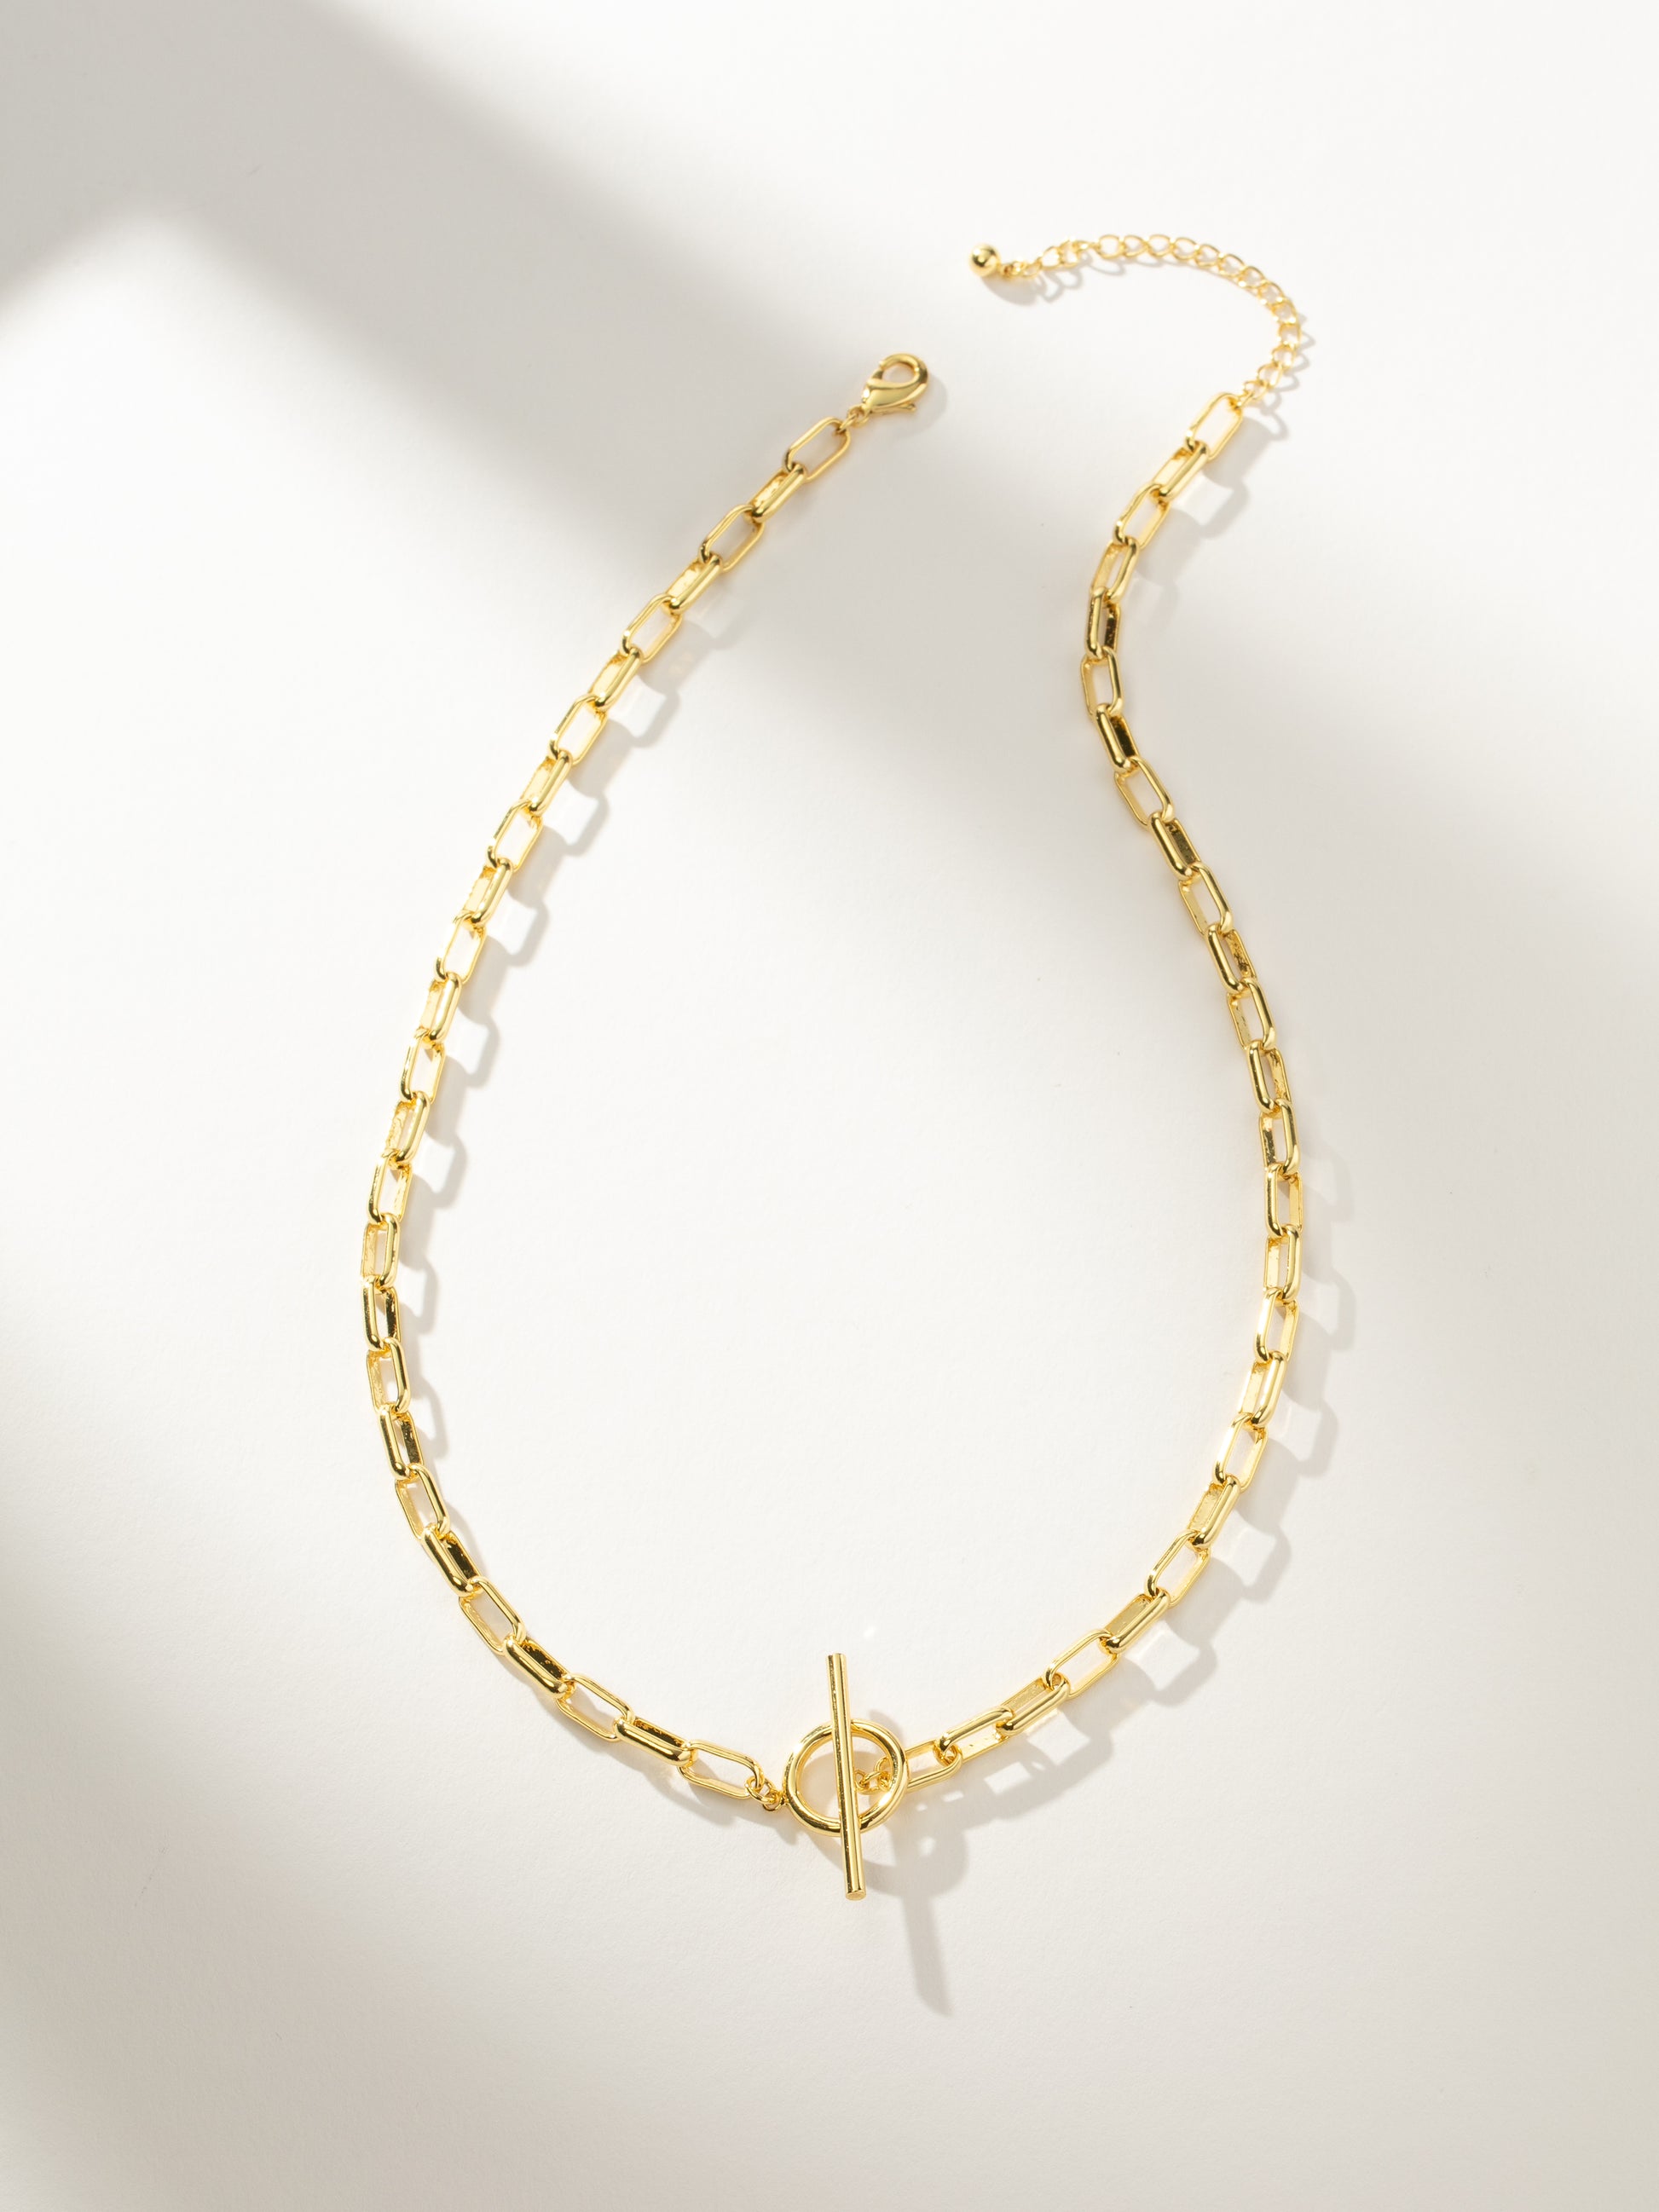 Staple Chain Necklace | Gold | Product Image | Uncommon James